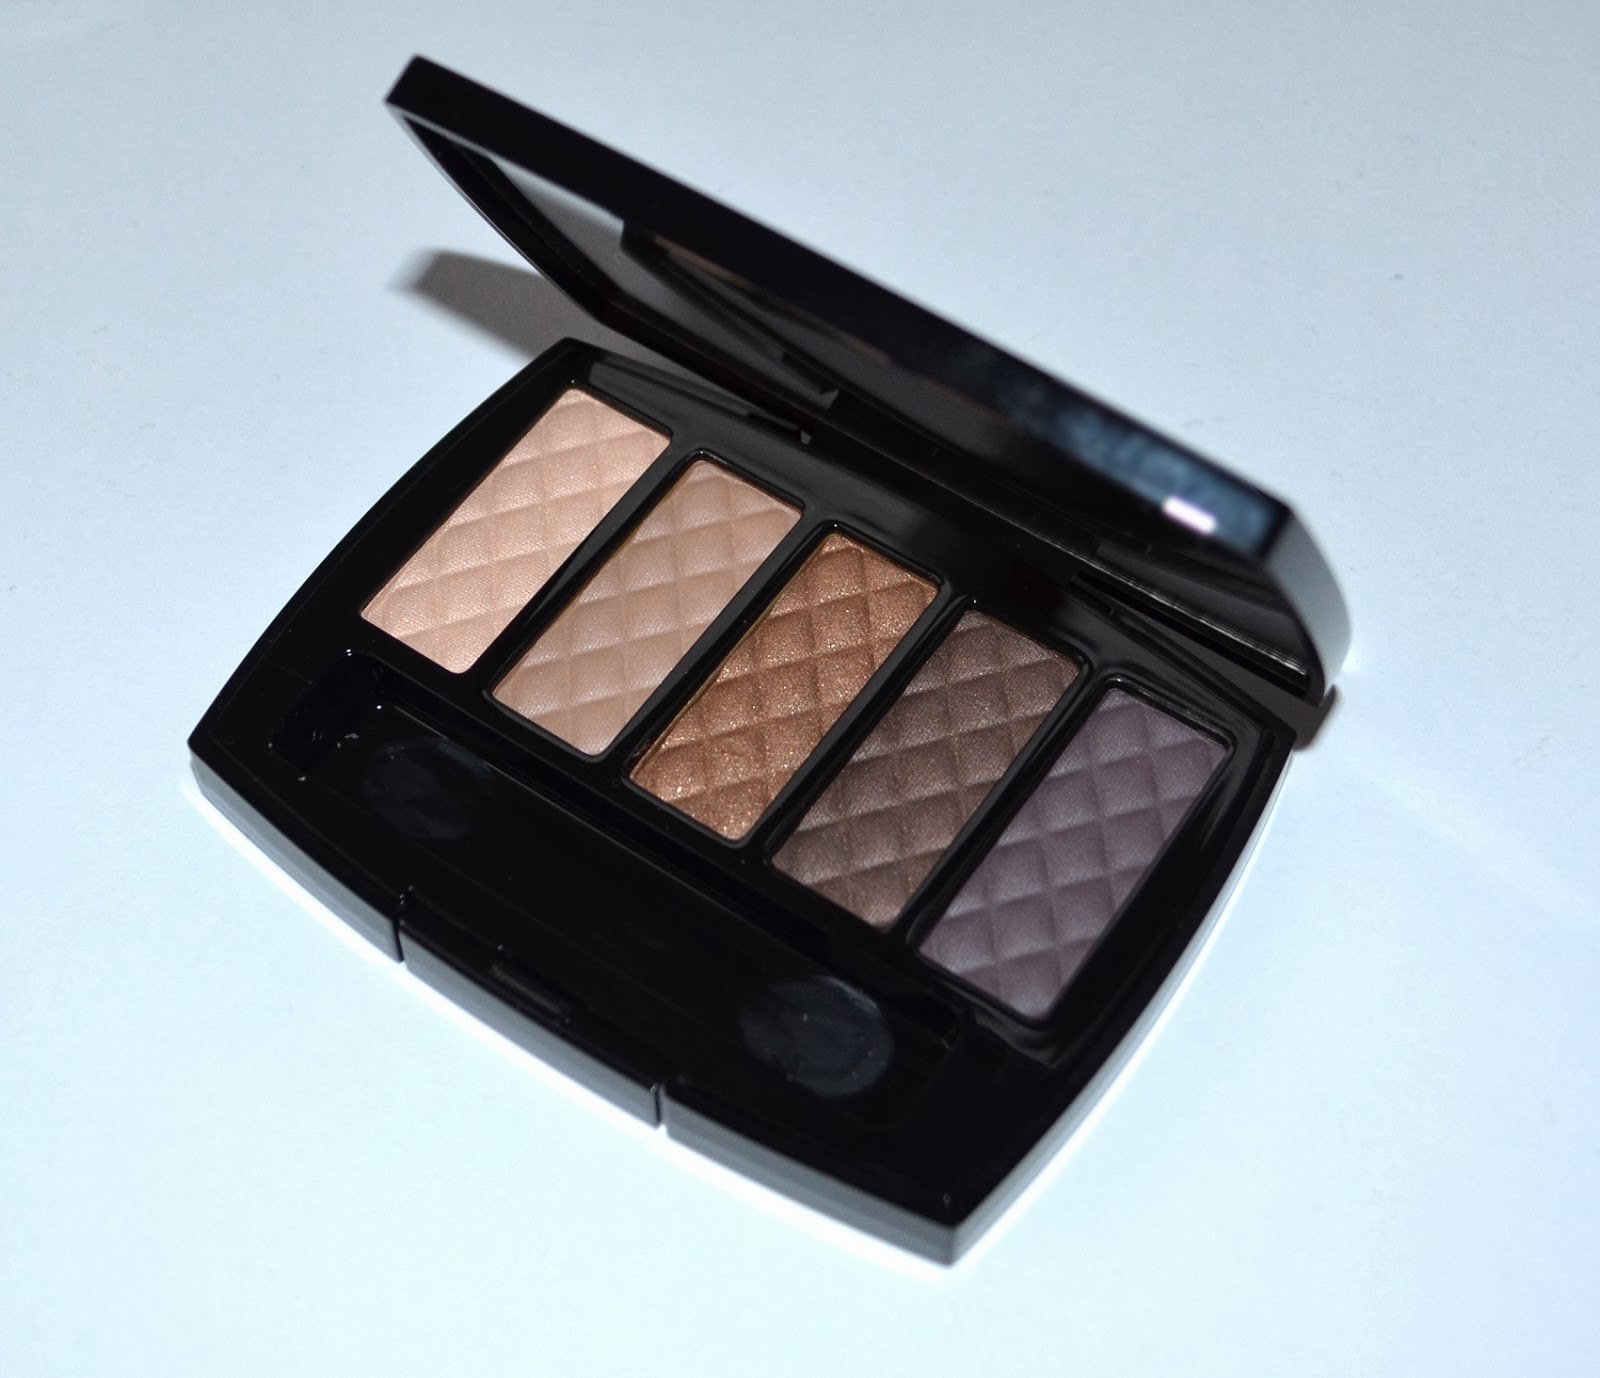 Chanel Ombres Matelassees Charming Eye Shadow Palette from Nuit